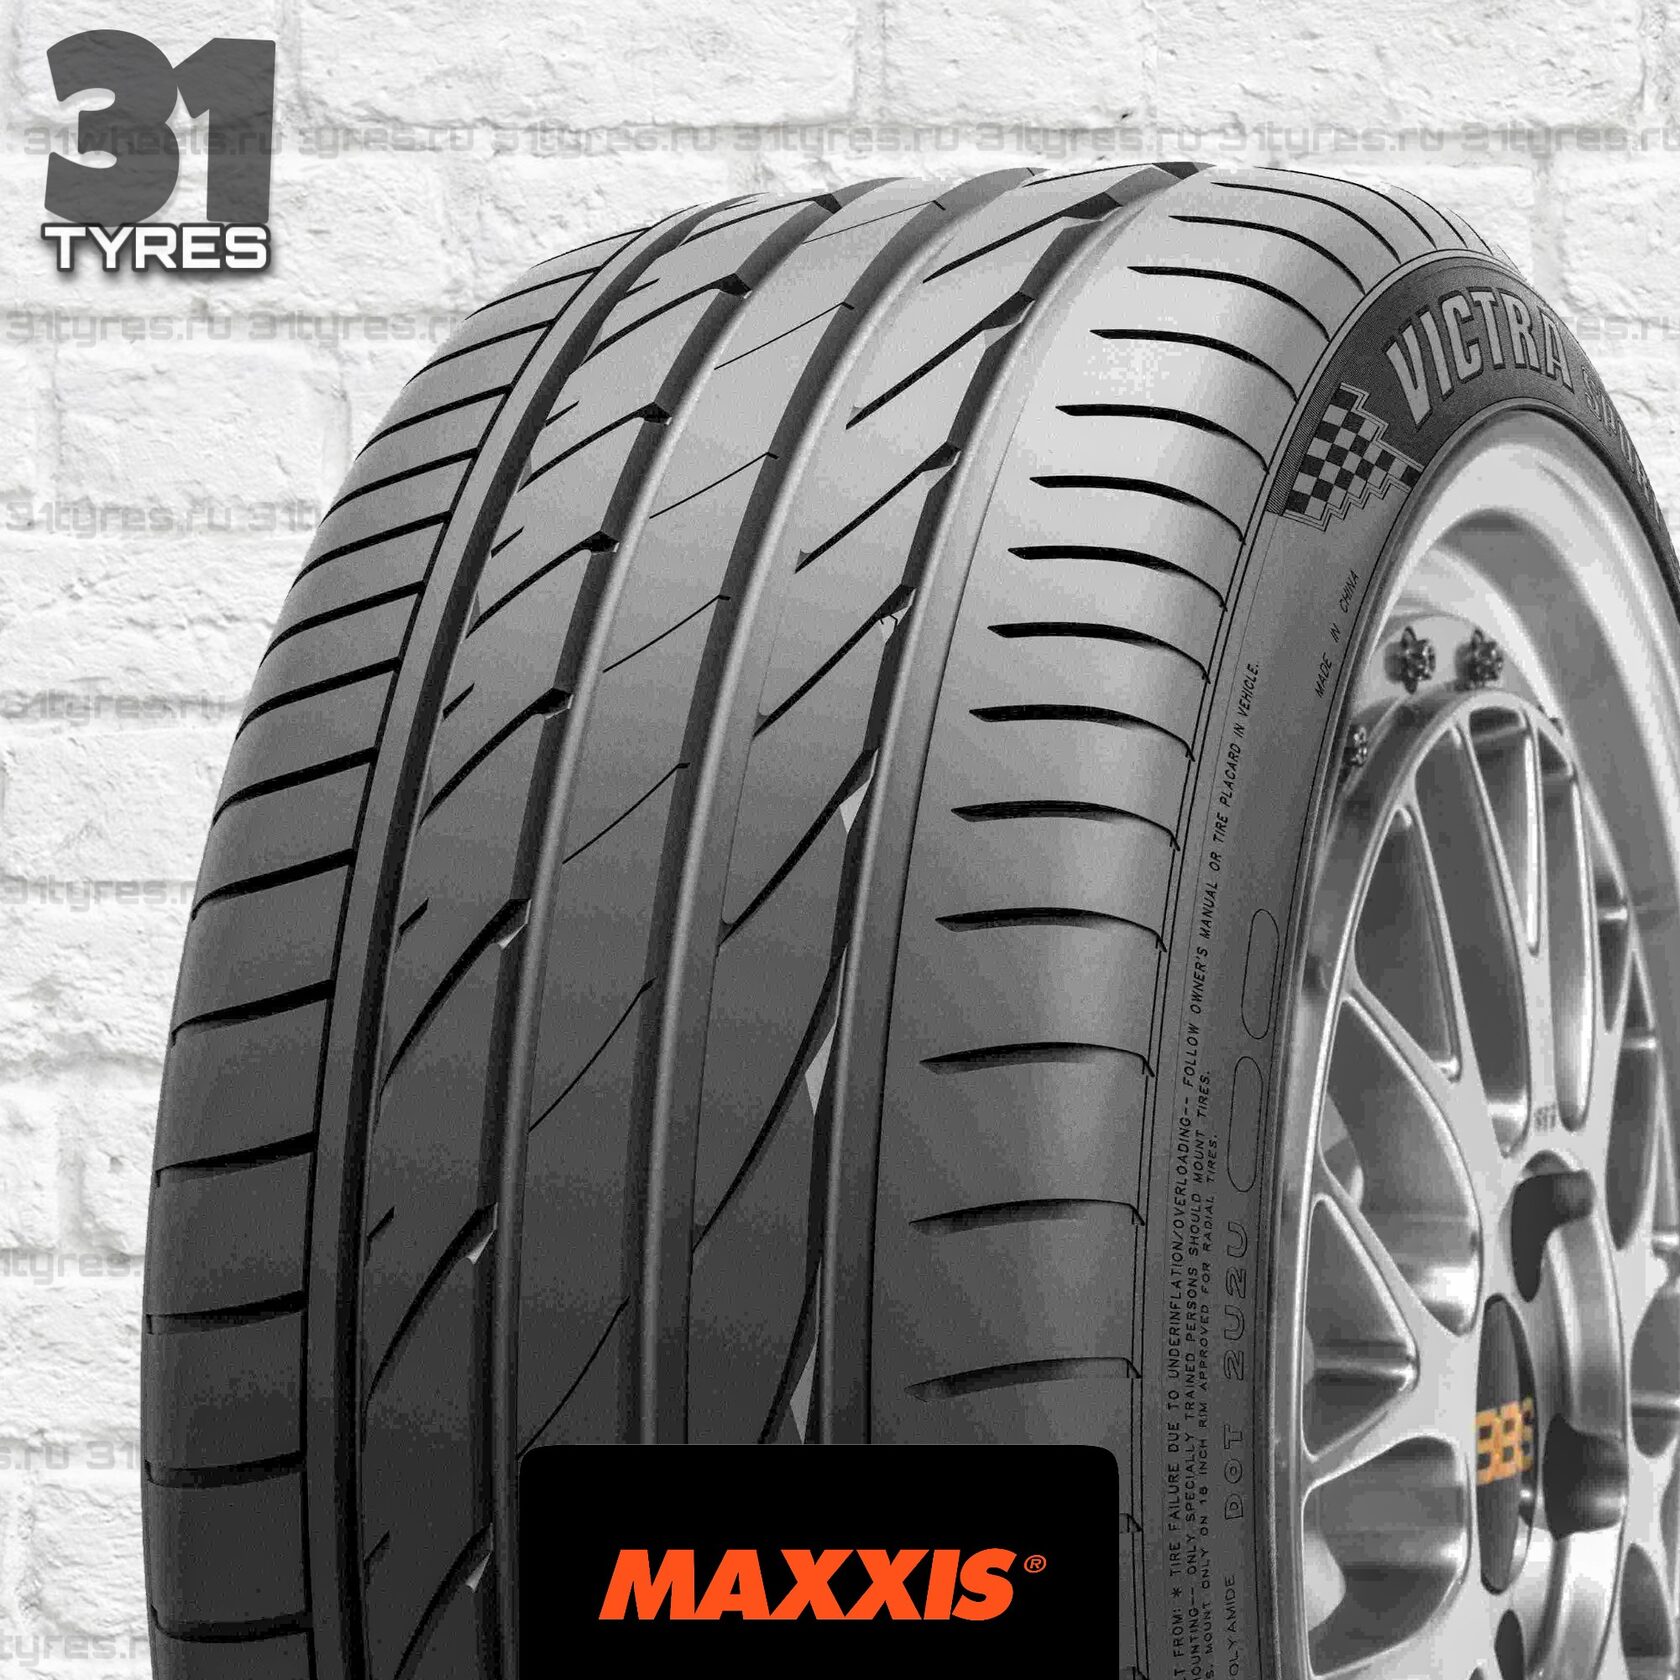 Maxxis victra sport 5 r20. Шины Maxxis Victra Sport 5. Maxxis Victra Sport vs5. Maxxis Victra Sport 5 SUV. Maxxis Victra Sport vs5 SUV.